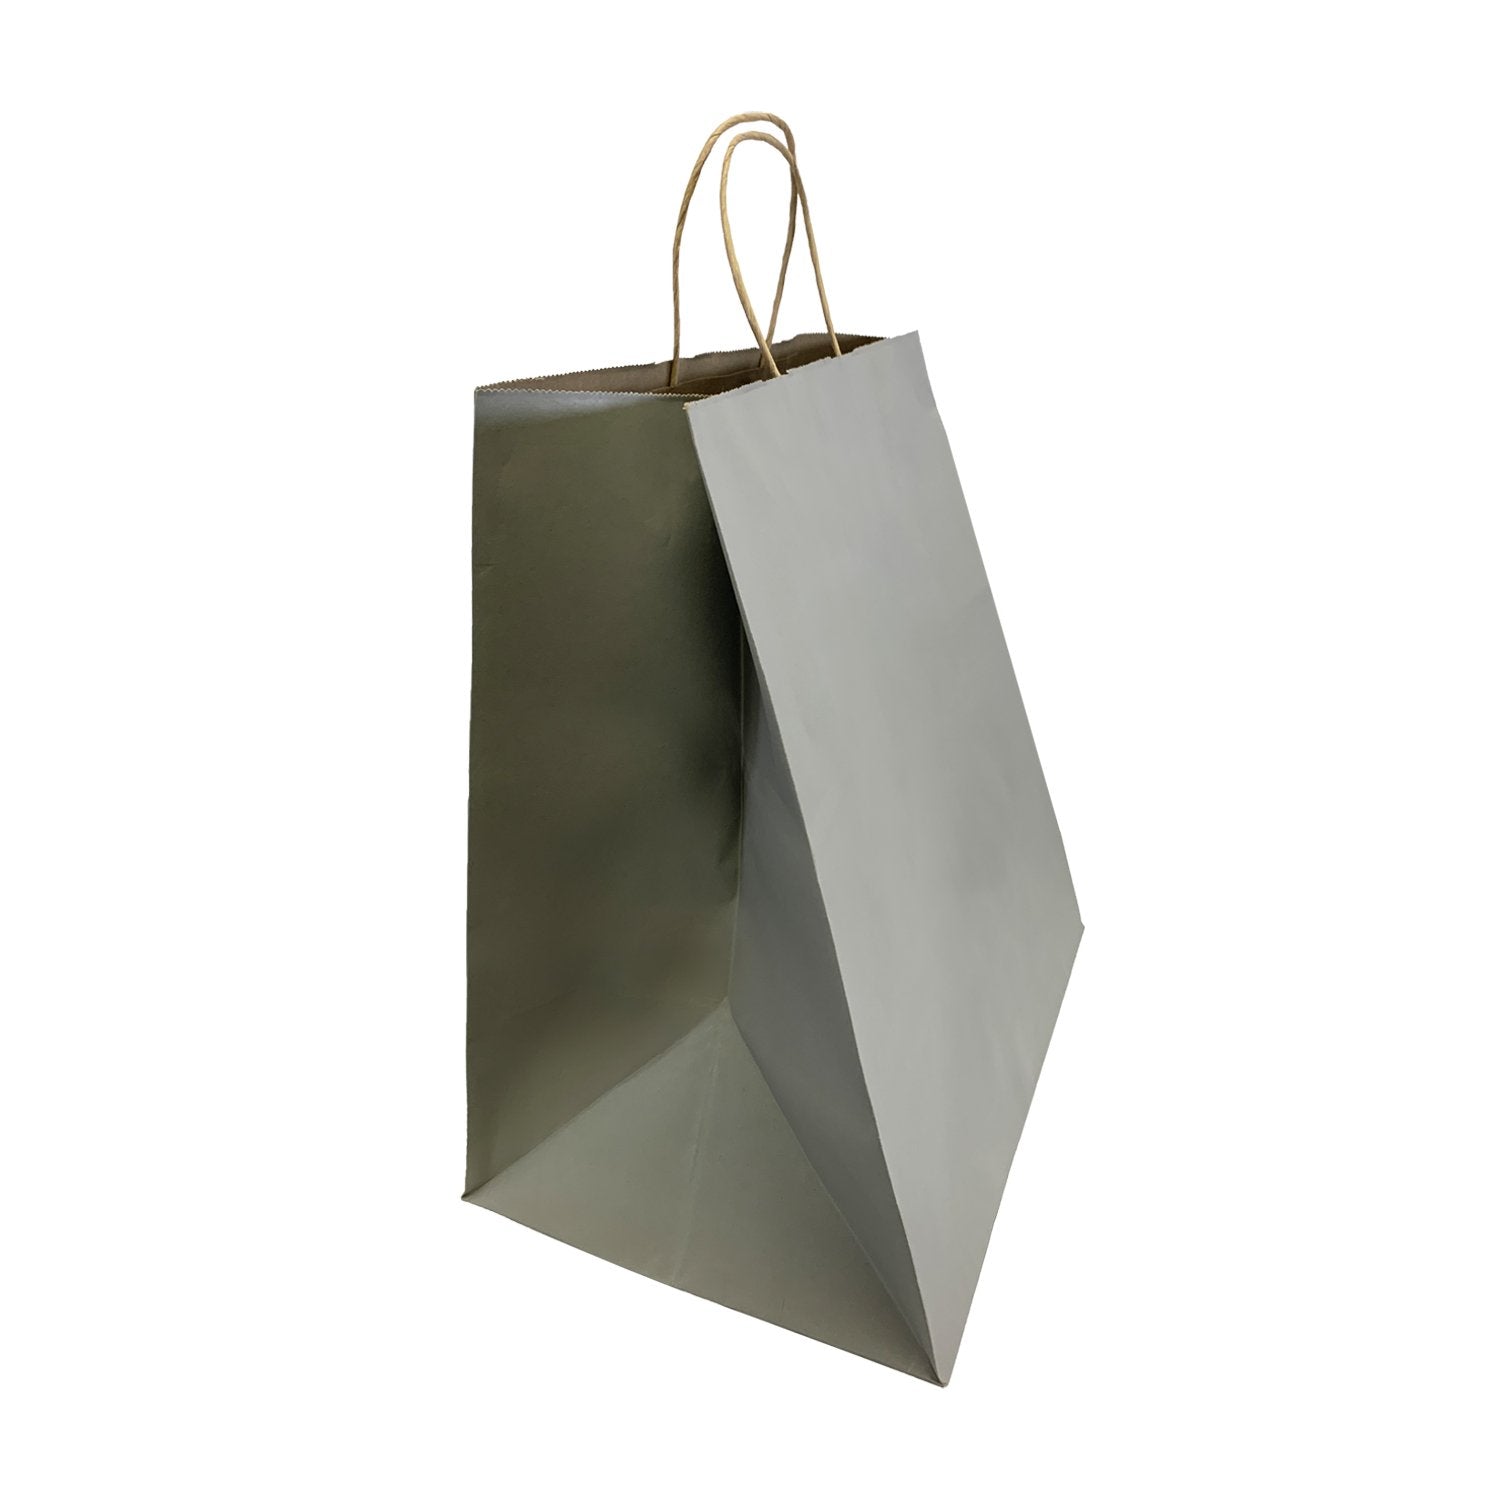 200 Pcs, Super Royal, 14x10x15.75 inches, Grey Kraft Paper Bags, with Twisted Handle